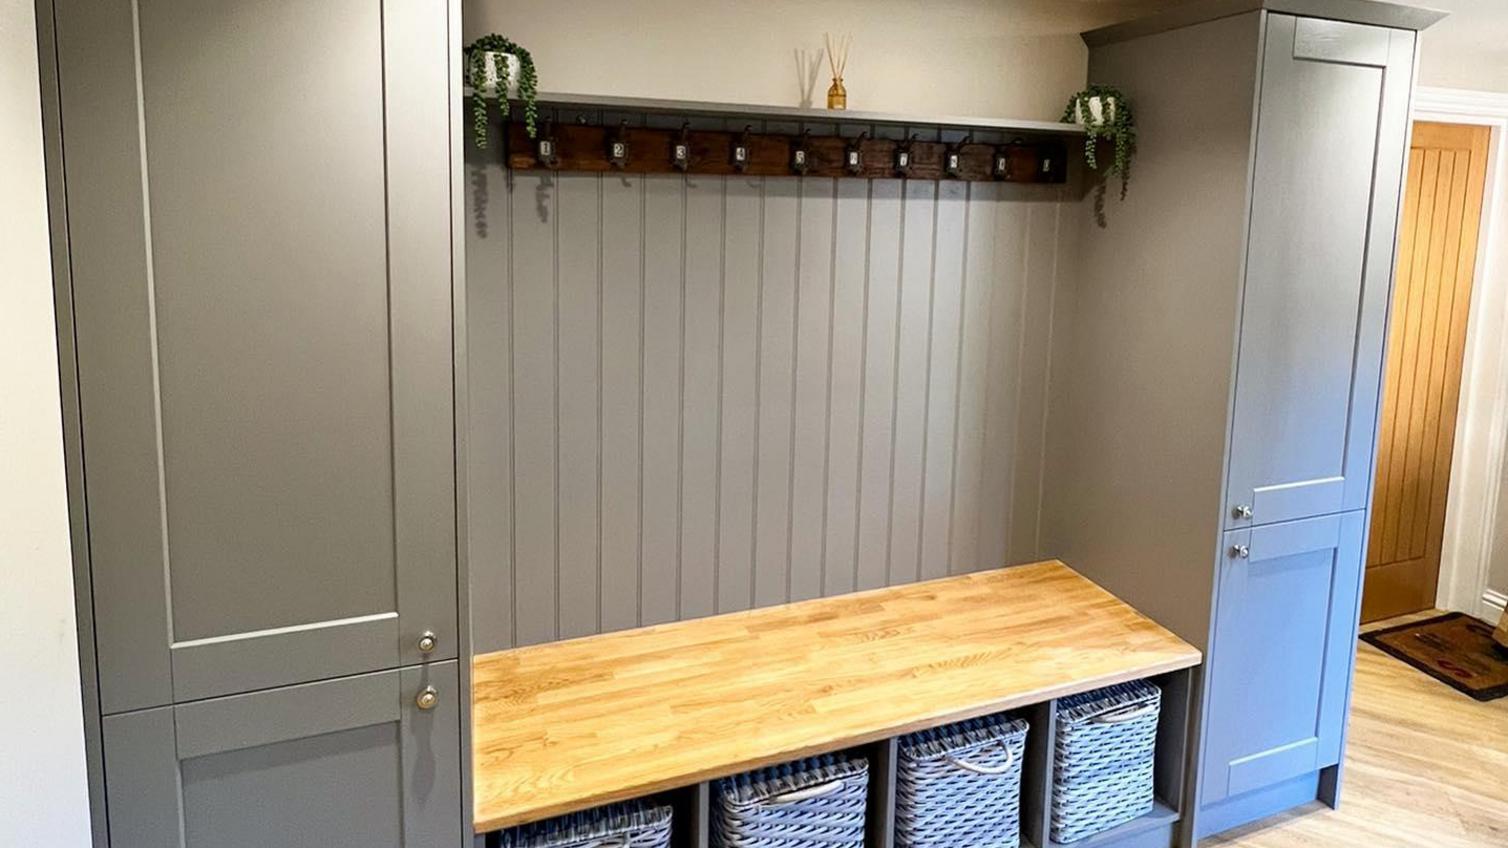 Fairford dusk blue larder cabinets in a hallway with an end panel underneath coat hooks and behind a bench.